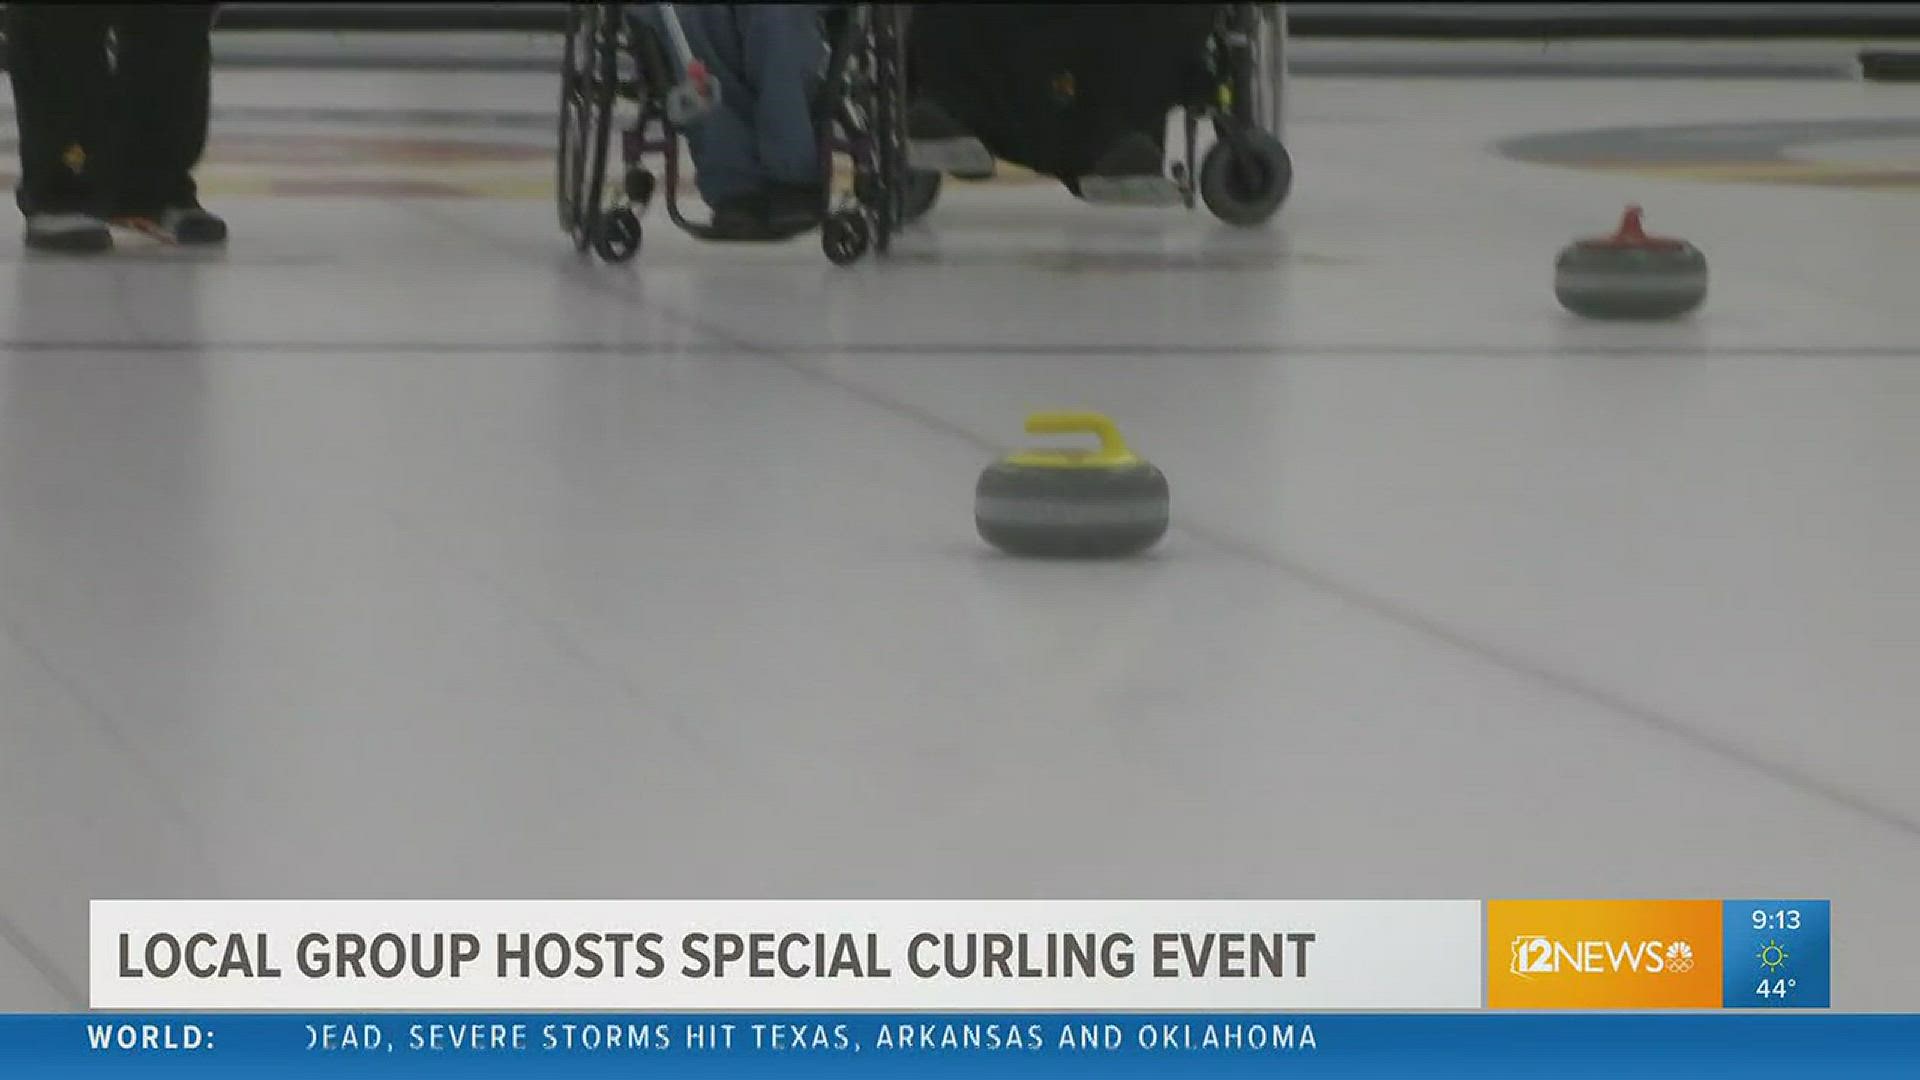 Ability360 Sports & Fitness Center and the Coyotes Curling Club hosted a wheelchair curling program Feb. 24 and 25 in Tempe.